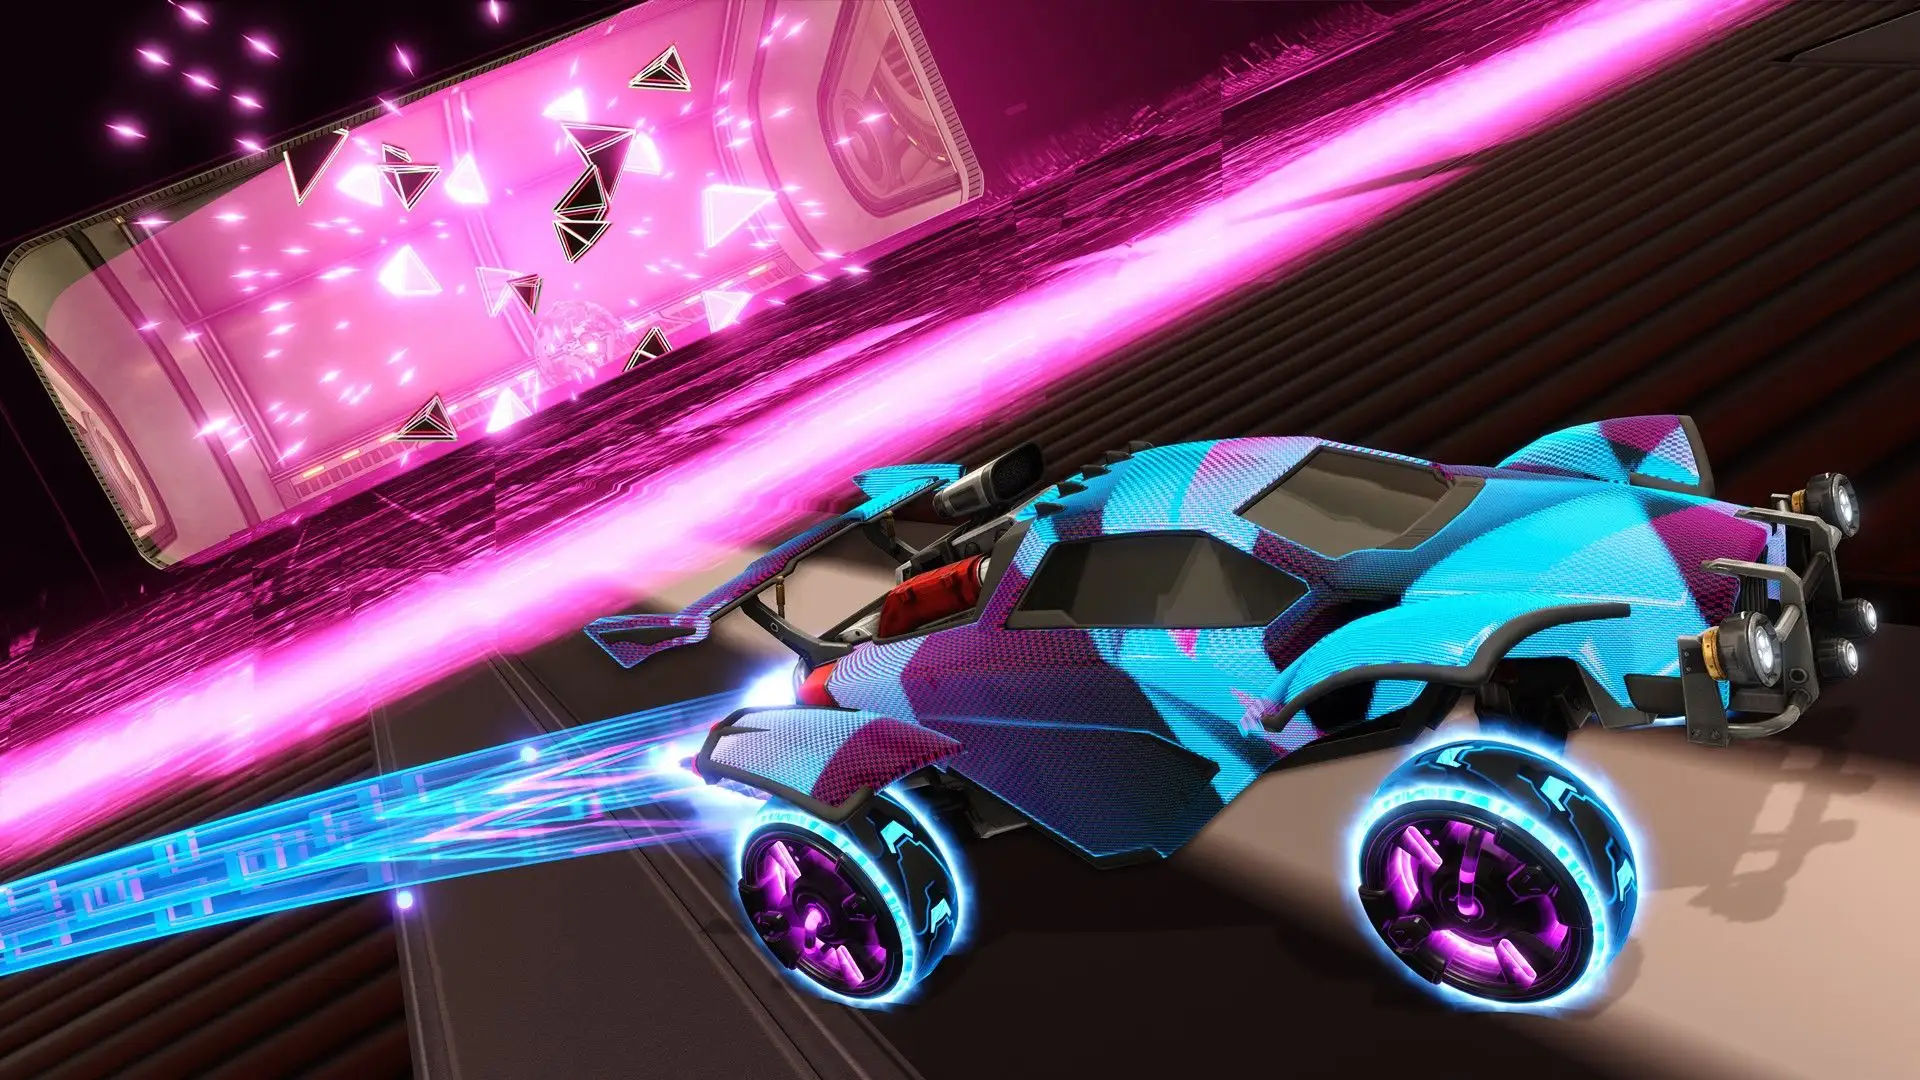 How do I earn special Rocket League in-game titles? - Rocket League Support